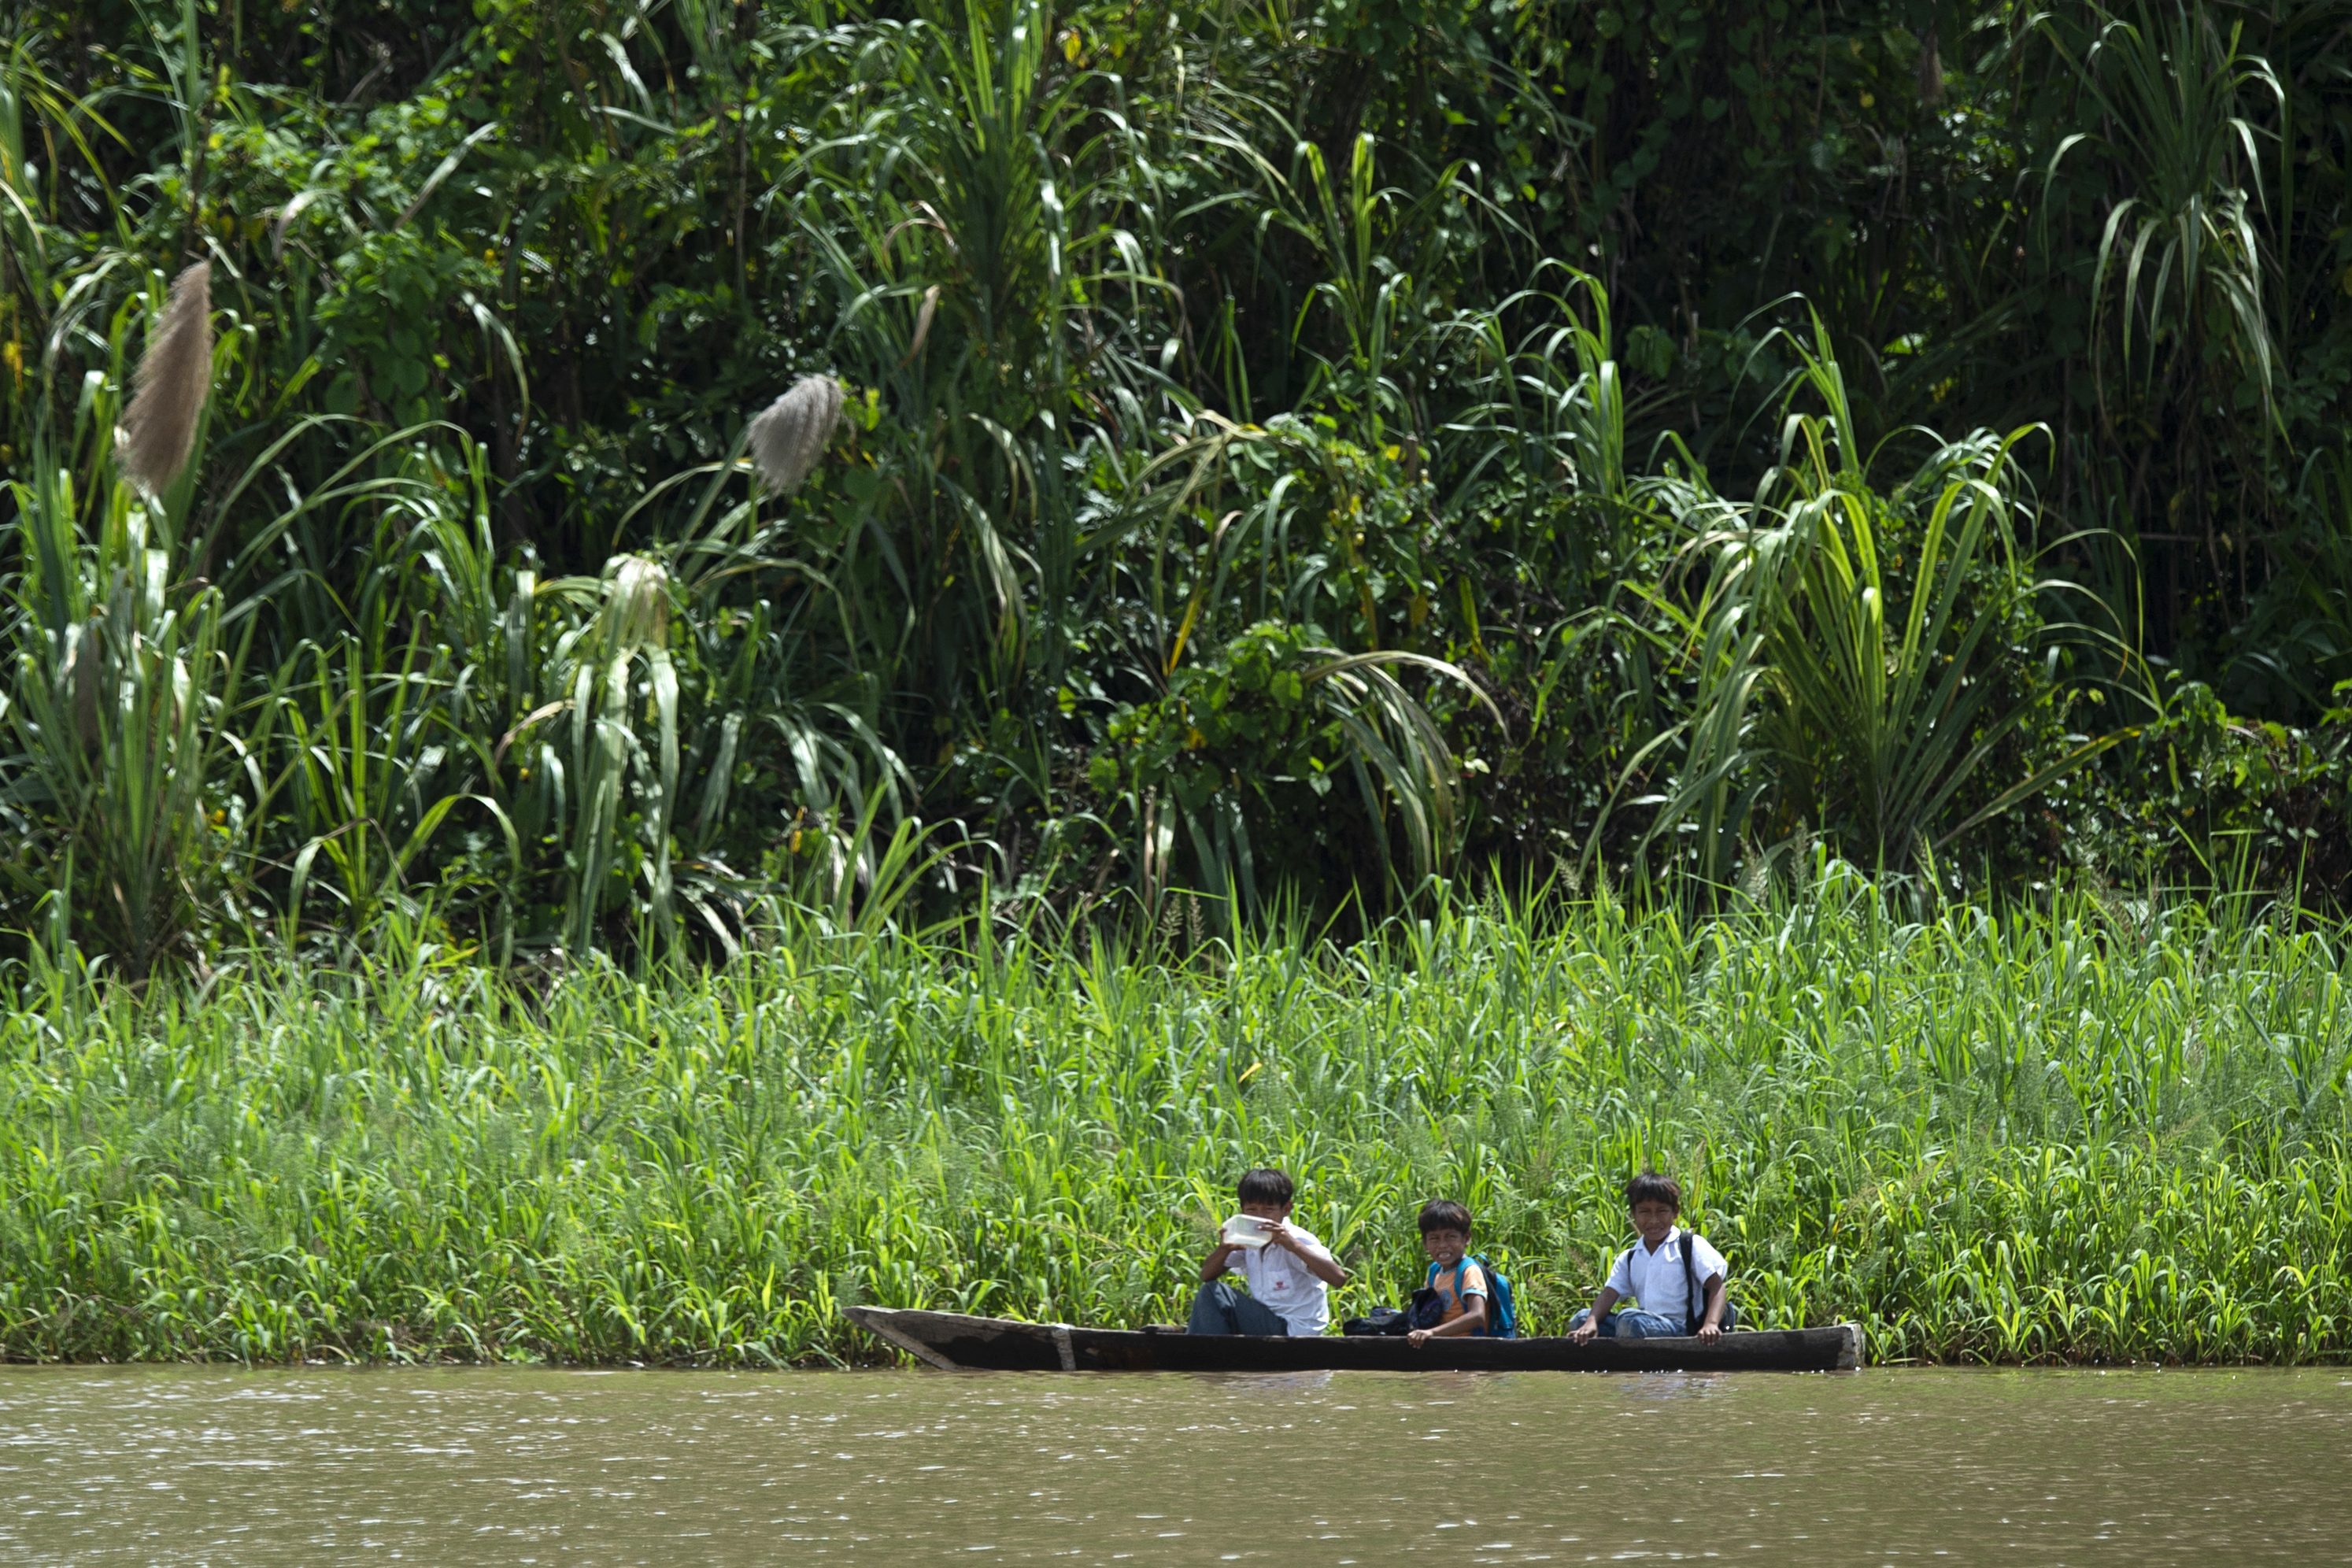 Children go to school by canoe on the Maranon River, a main tributary of the Amazon River, in the Pacaya Samiria National Reserve in May 2019. (Cris Bouroncle/AFP/Getty Images)